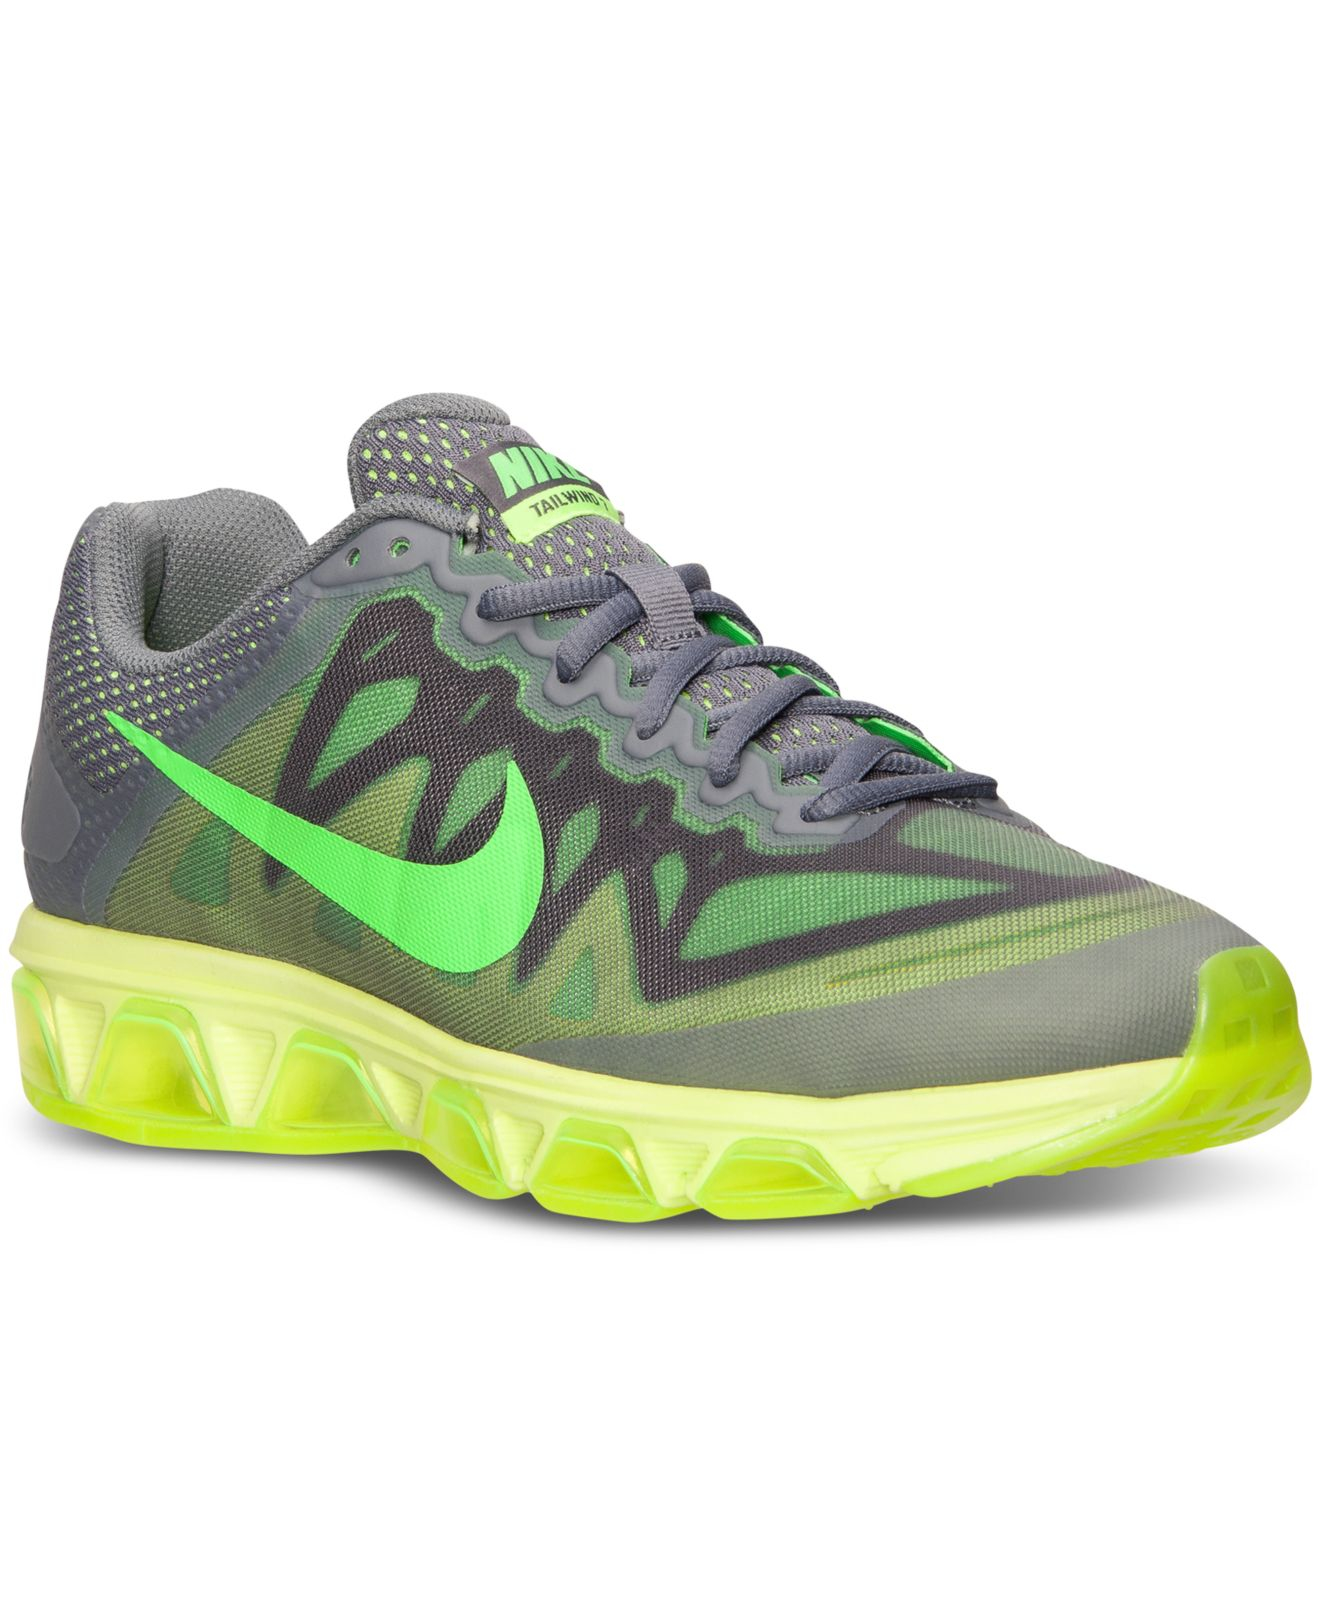 Lyst - Nike Men's Air Max Tailwind 7 Running Sneakers From Finish Line ...